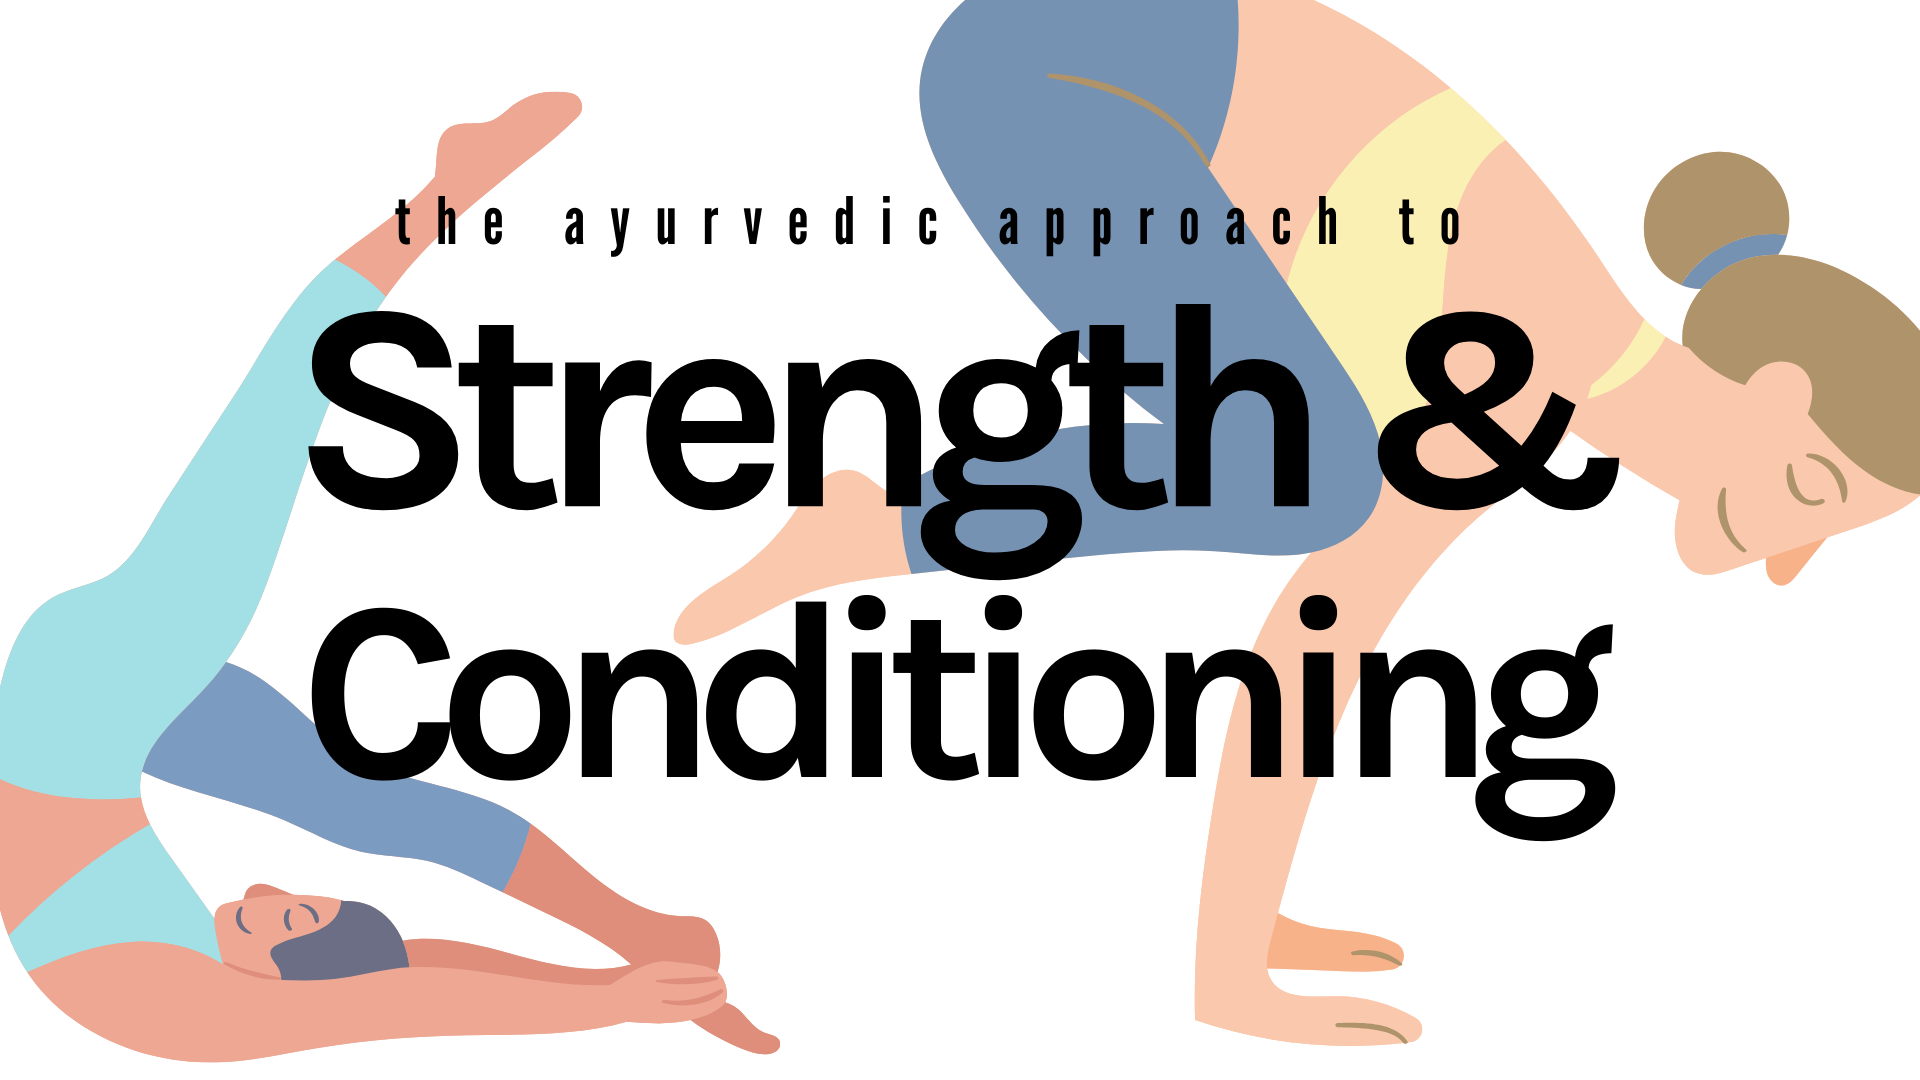 The Ayurvedic Approach to Strength and Conditioning